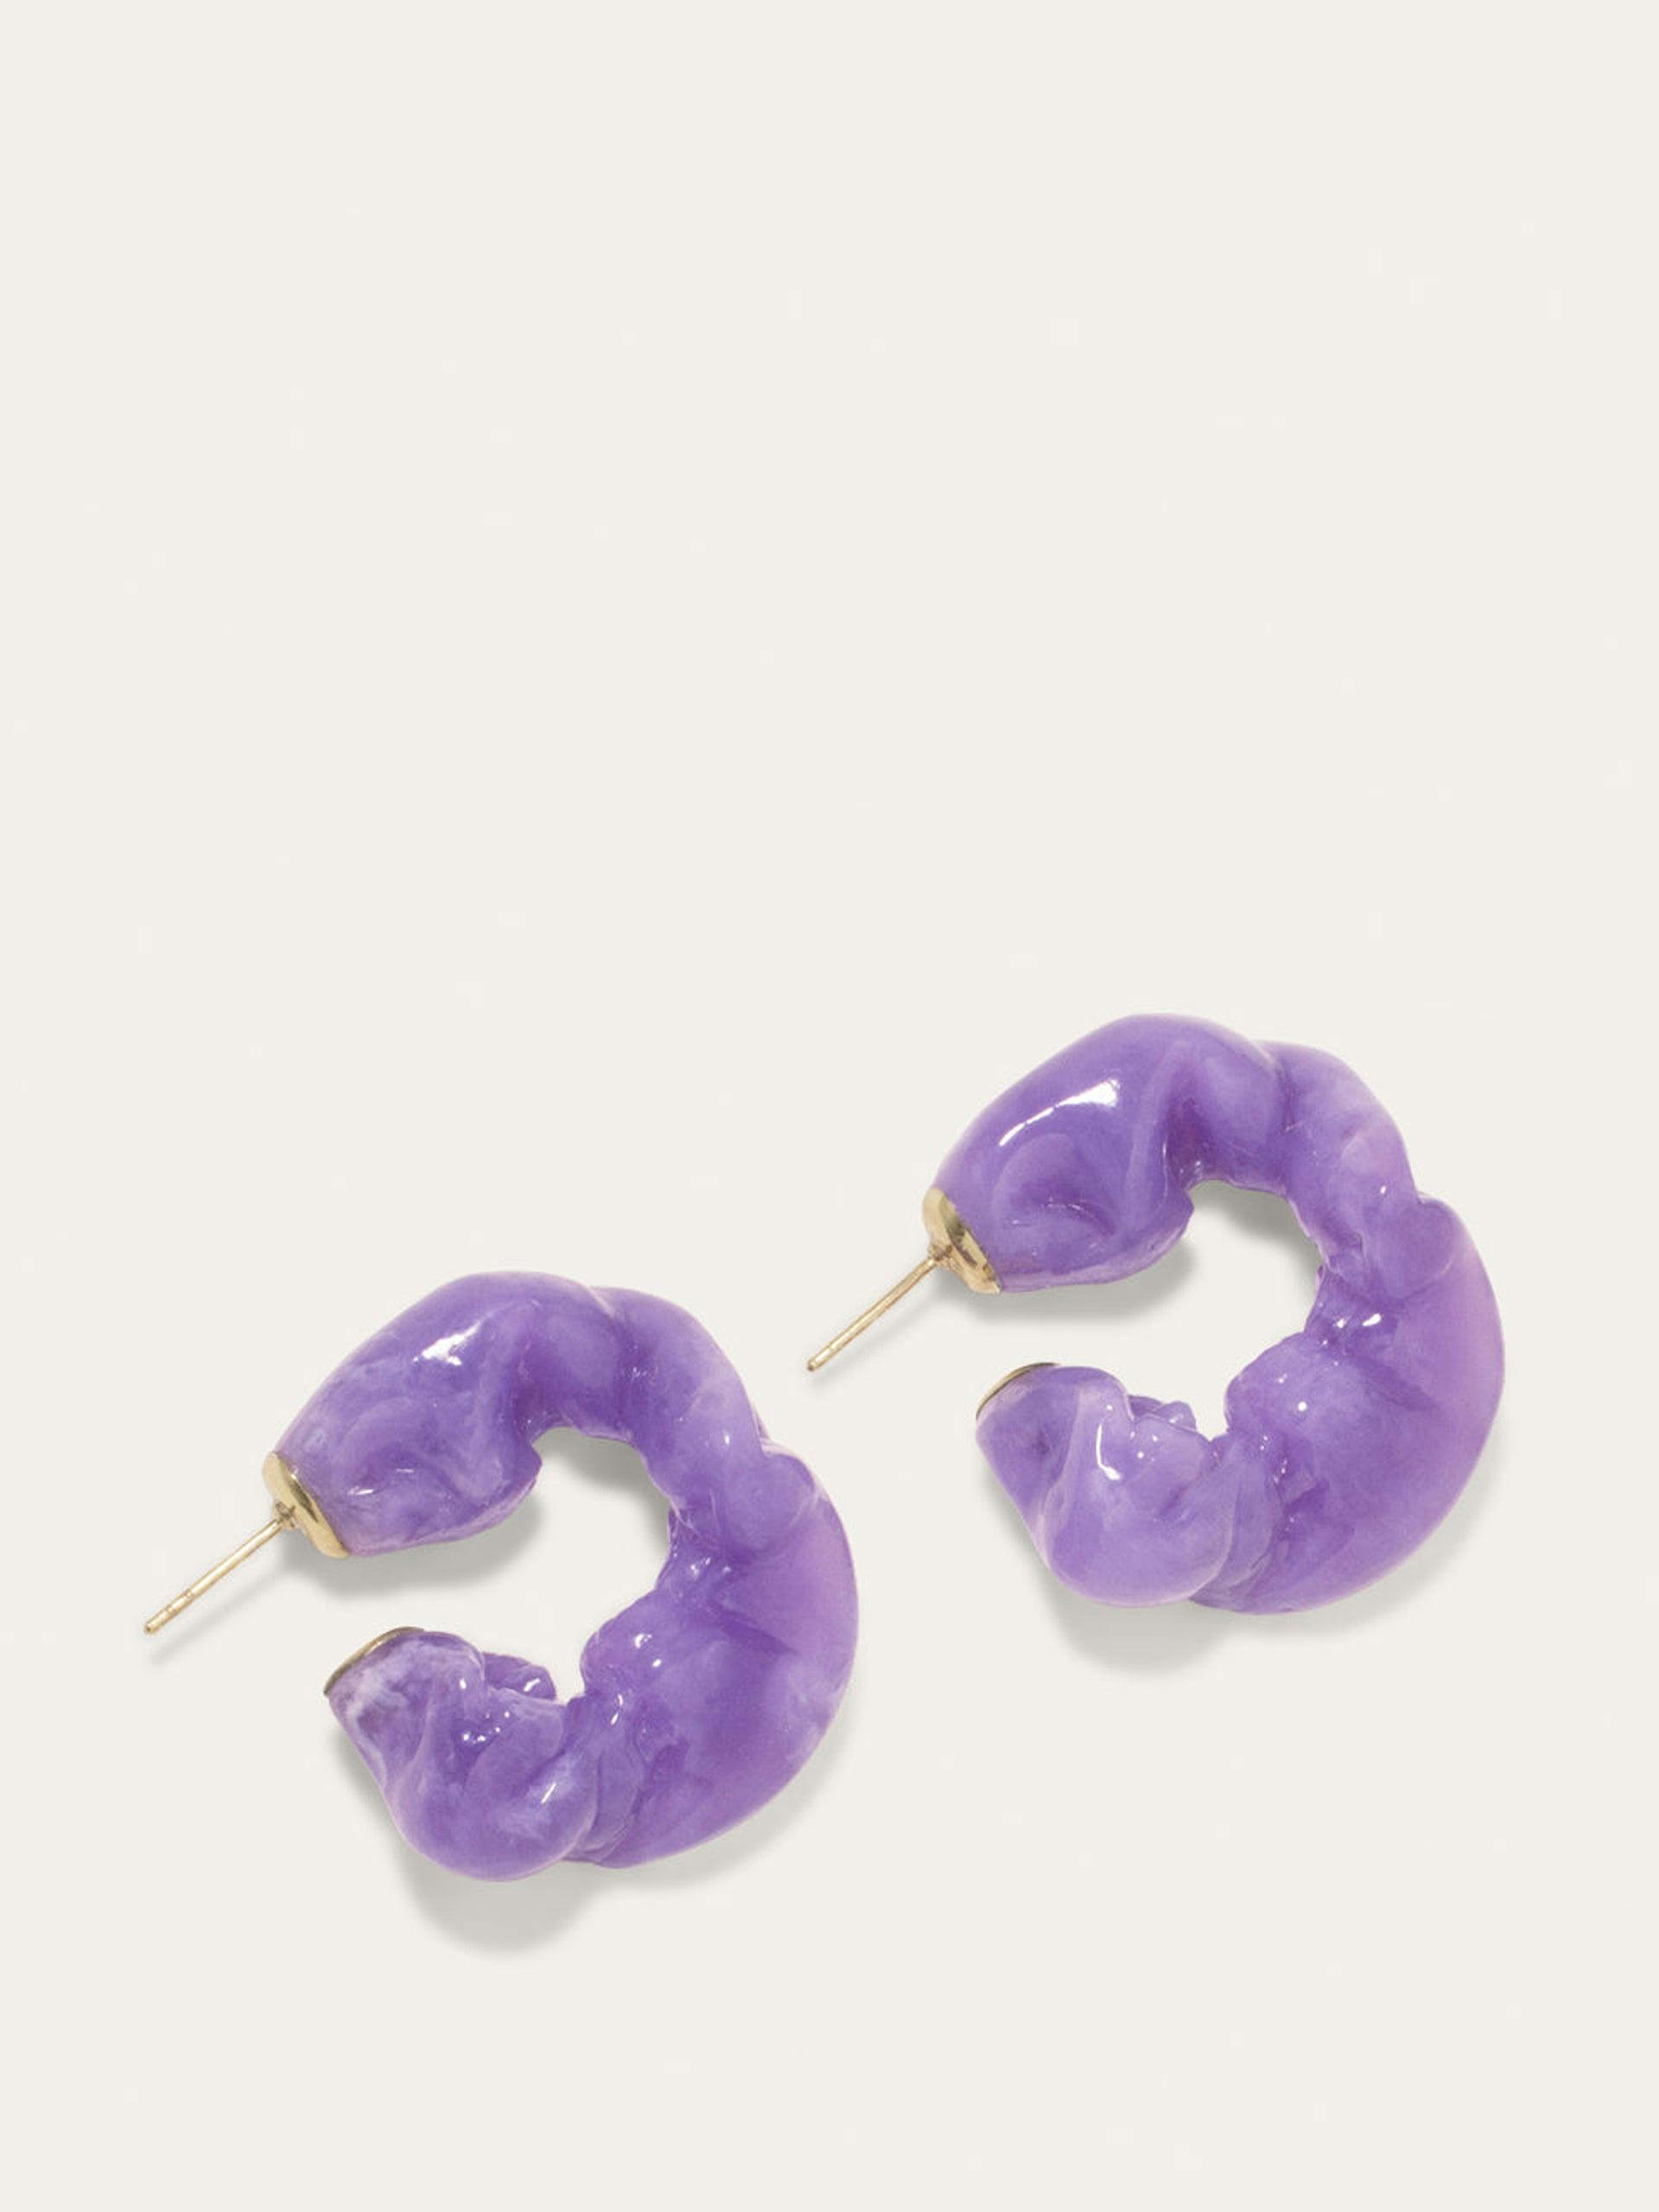 "Ruffle" lilac resin and gold vermeil earrings